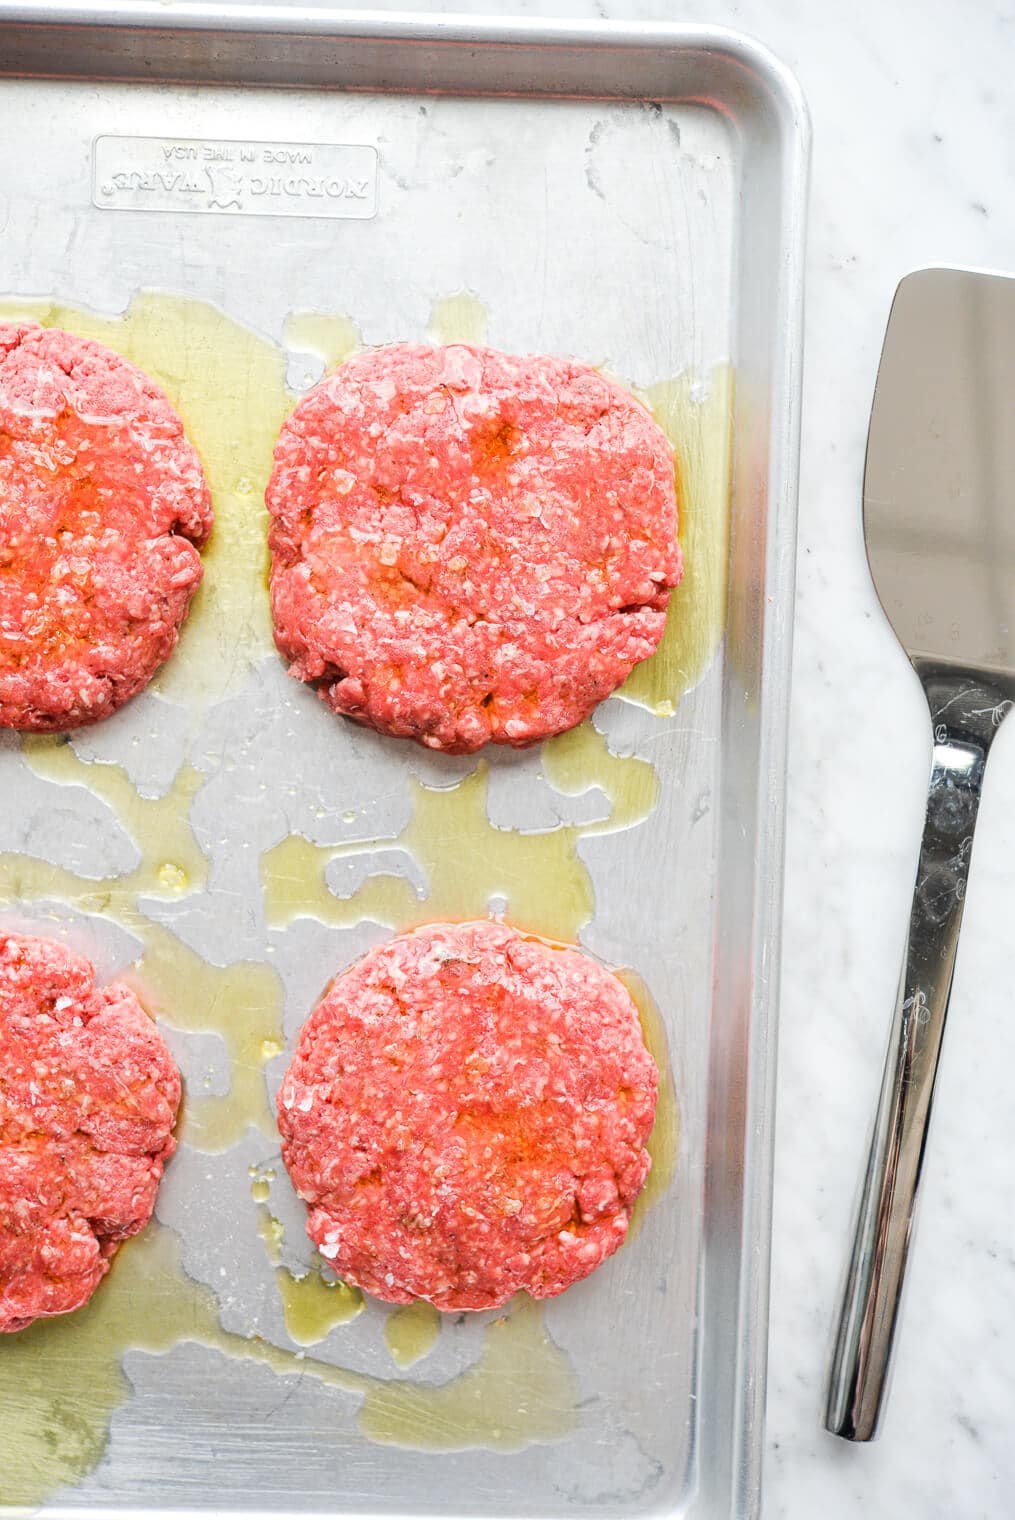 raw beef patties drizzled with olive oil sitting on a metal sheet pan